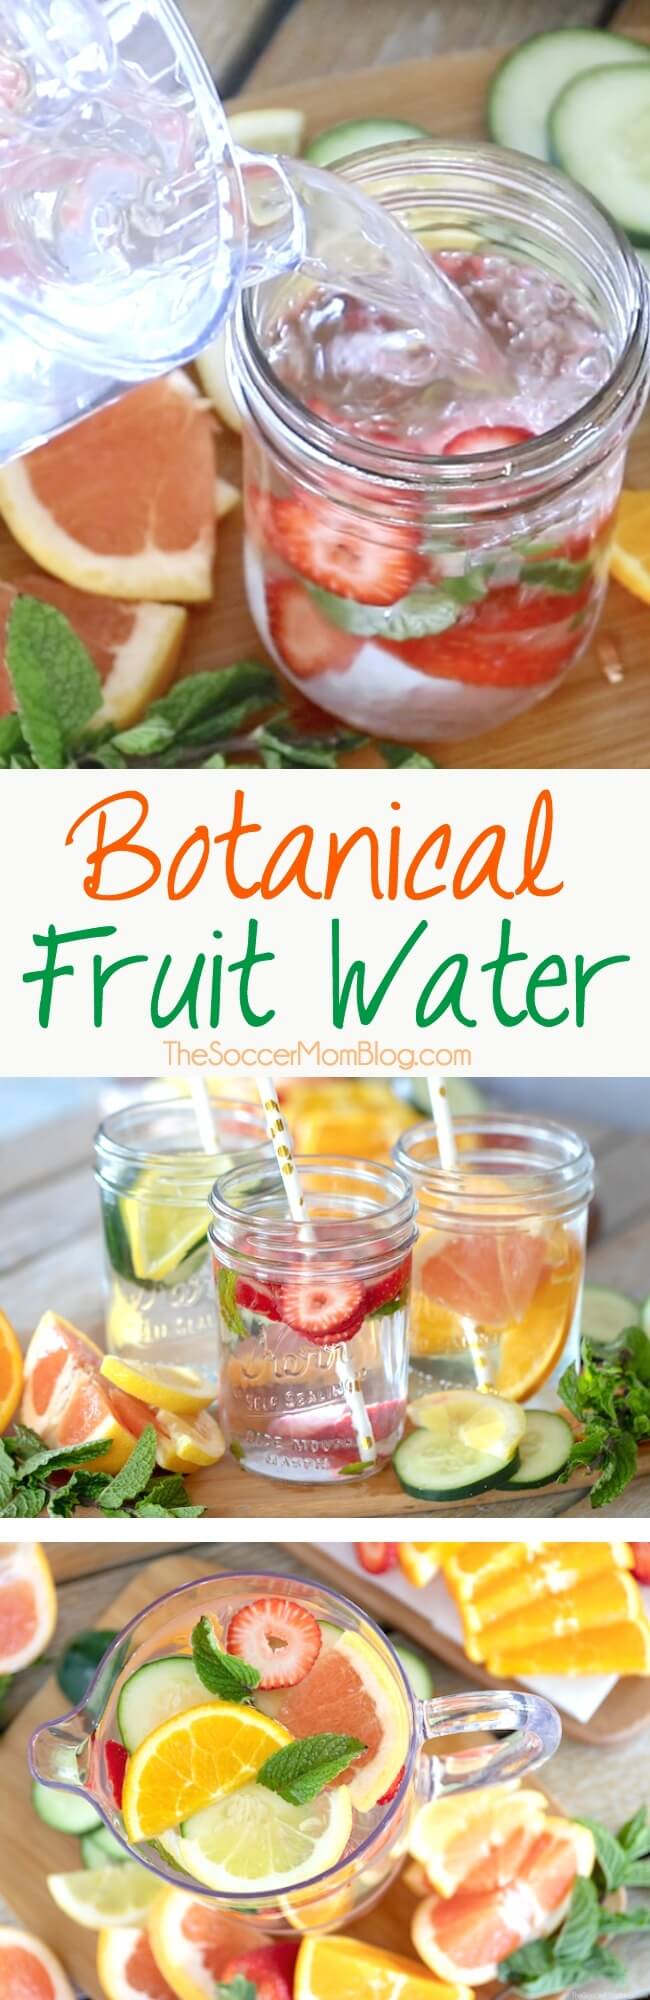 Give your body the healing benefits of botanicals: cleansing, detox, hydration. This simple fruit and herb infused water nourishes and refreshes.